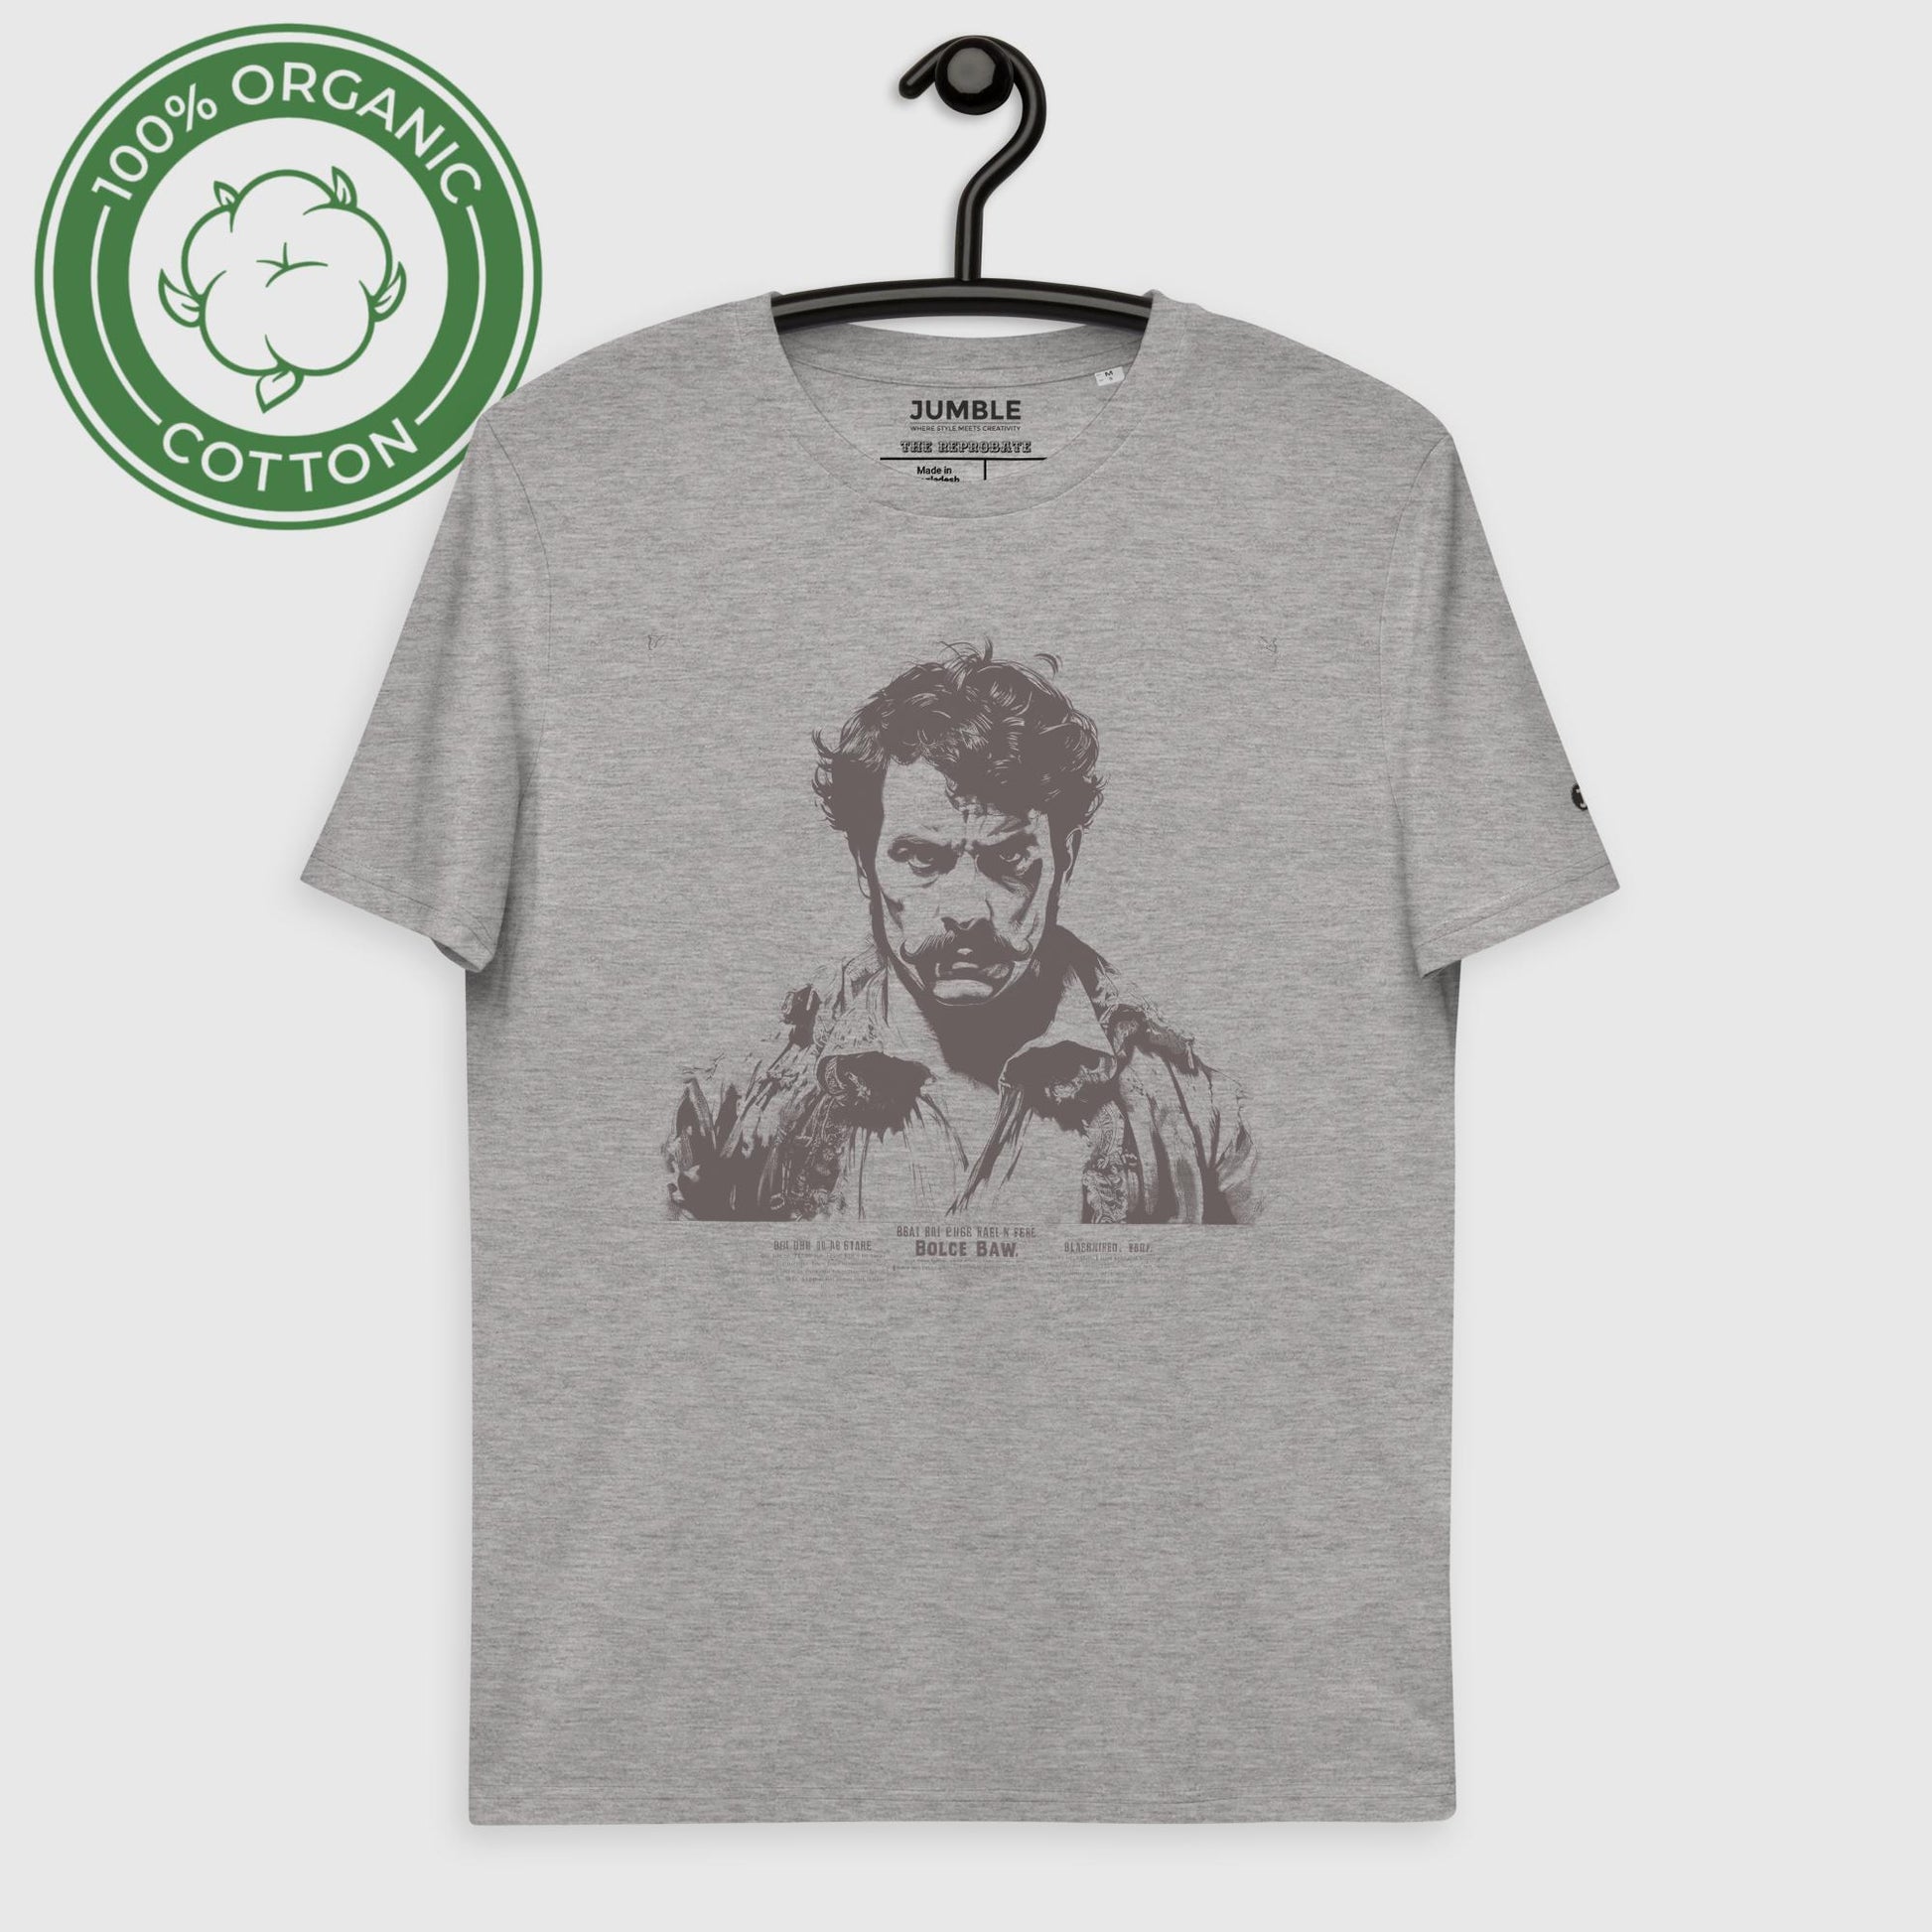 The Reprobate Unisex Organic Cotton T-shirt in heather grey on hanger